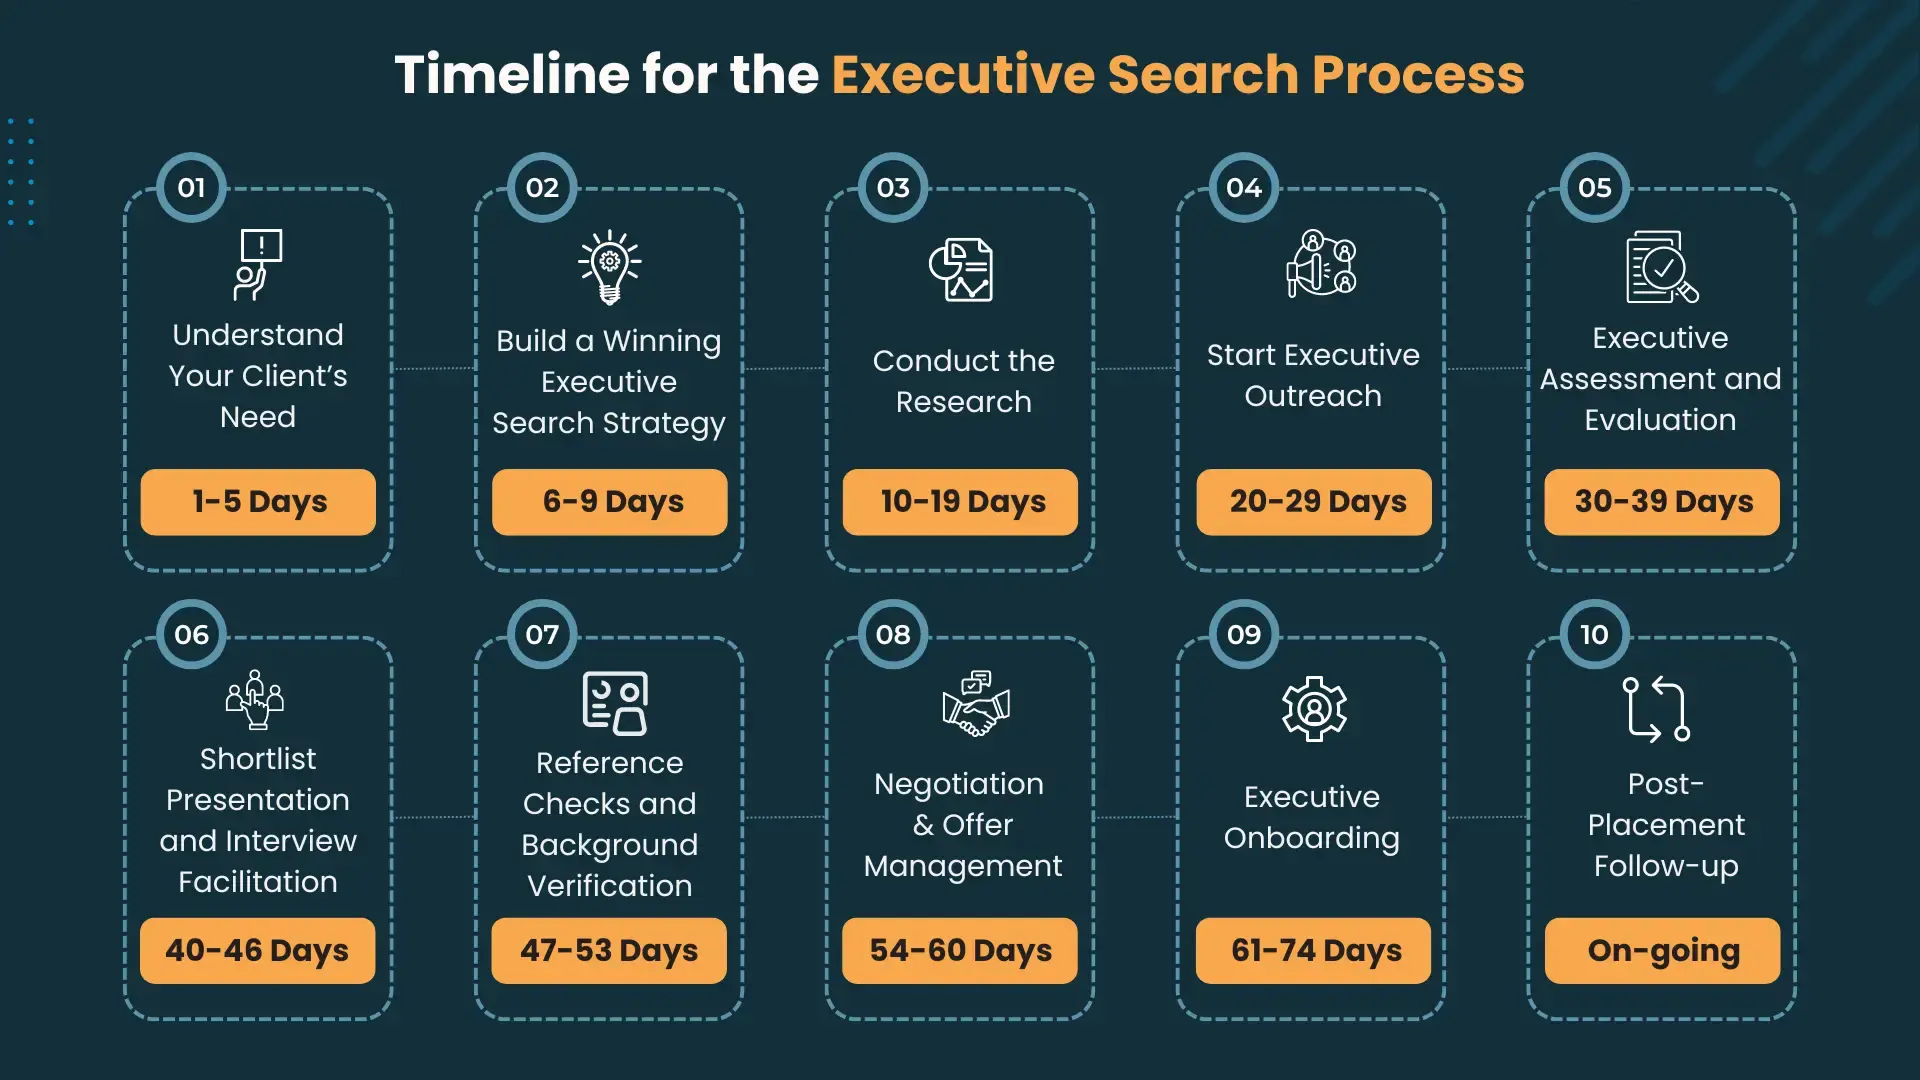 Timeline for Executive Search Process